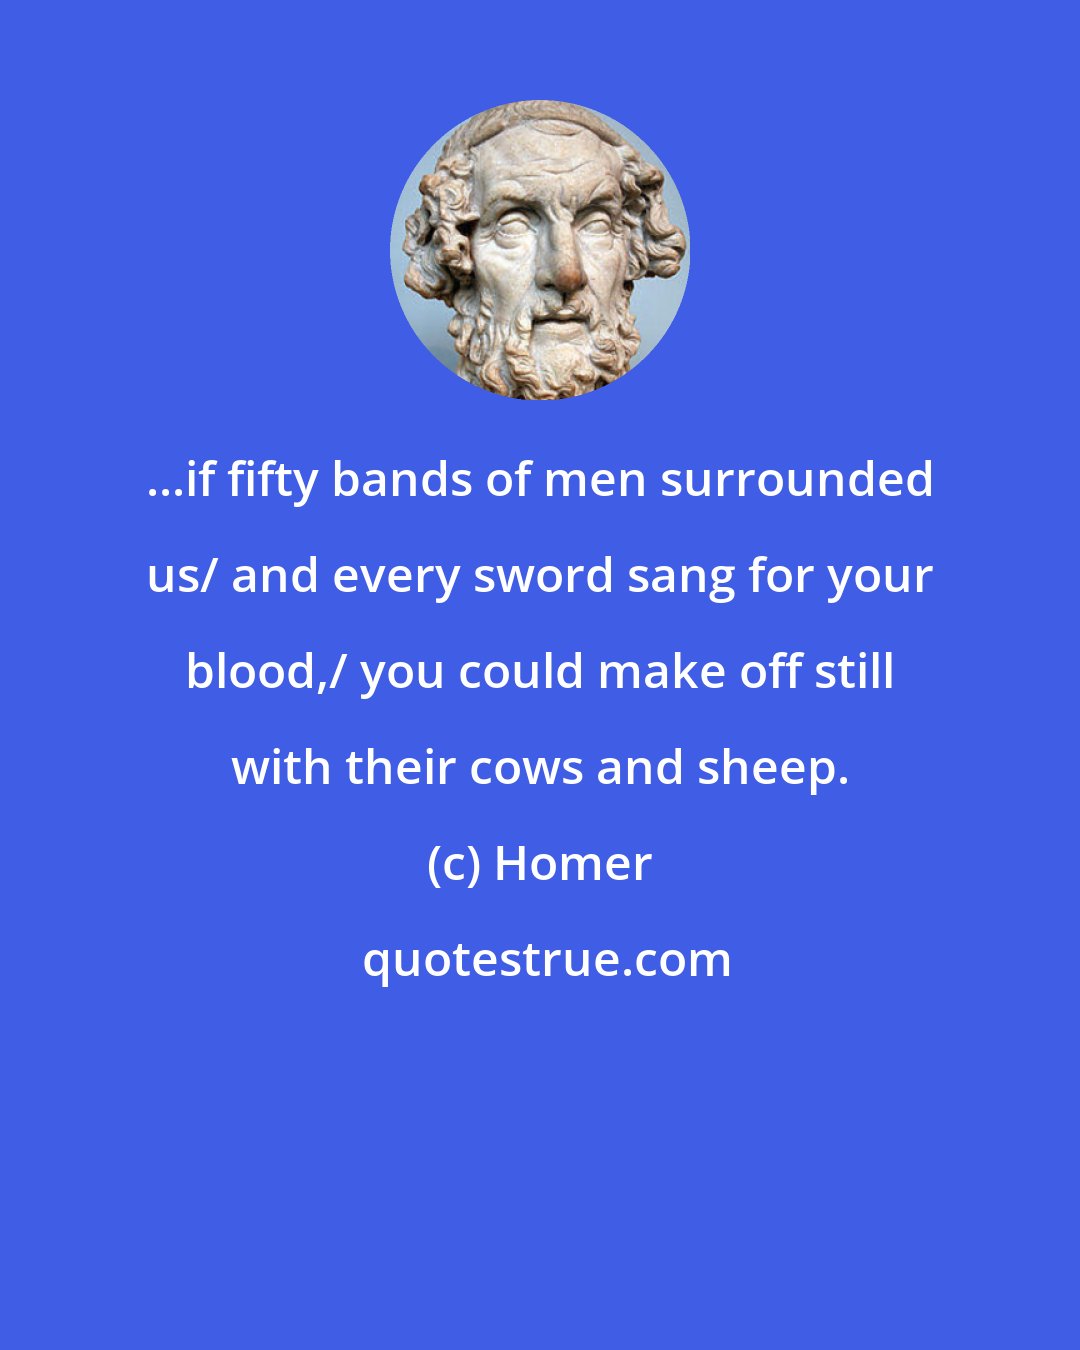 Homer: ...if fifty bands of men surrounded us/ and every sword sang for your blood,/ you could make off still with their cows and sheep.